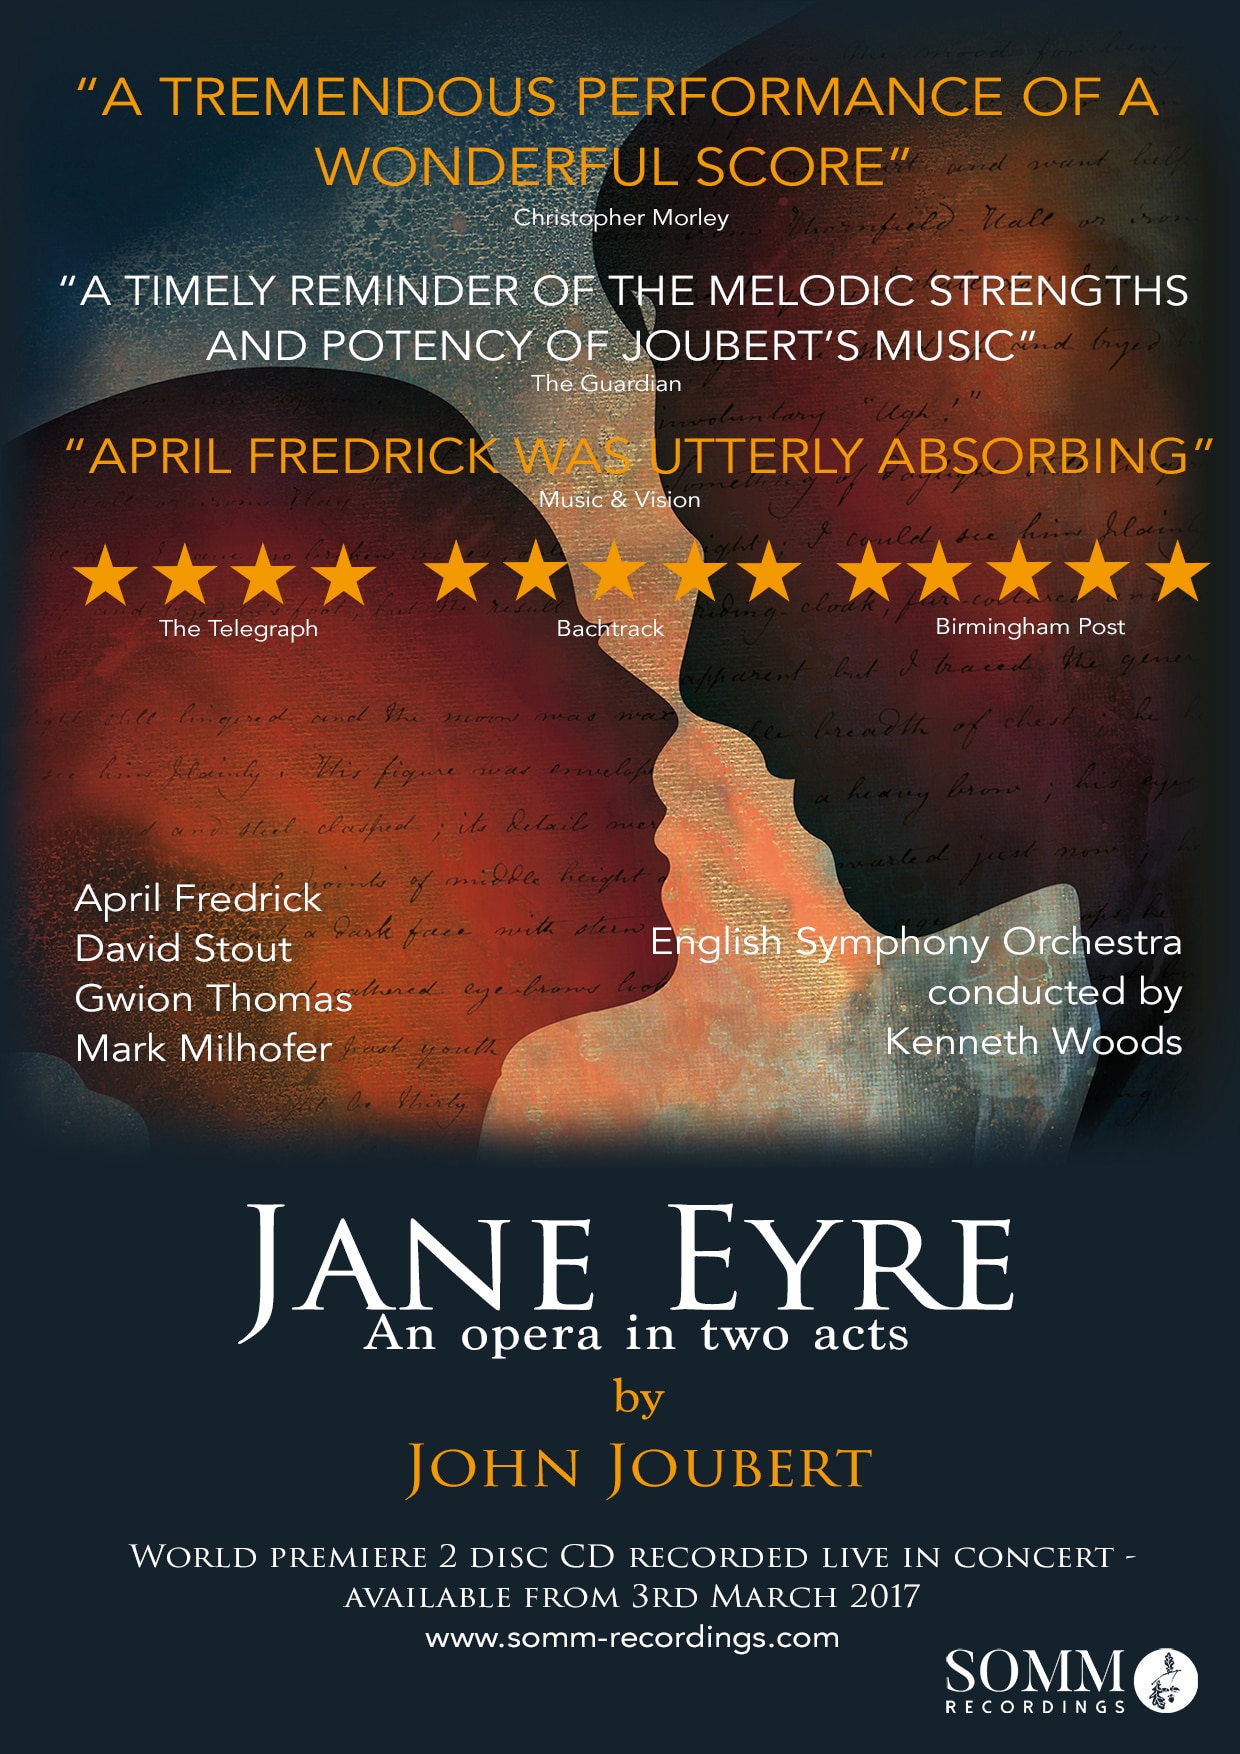 ESO Earns Classical Music Magazine “Premiere of the Year” for Second Year in a Row with John Joubert’s Jane Eyre